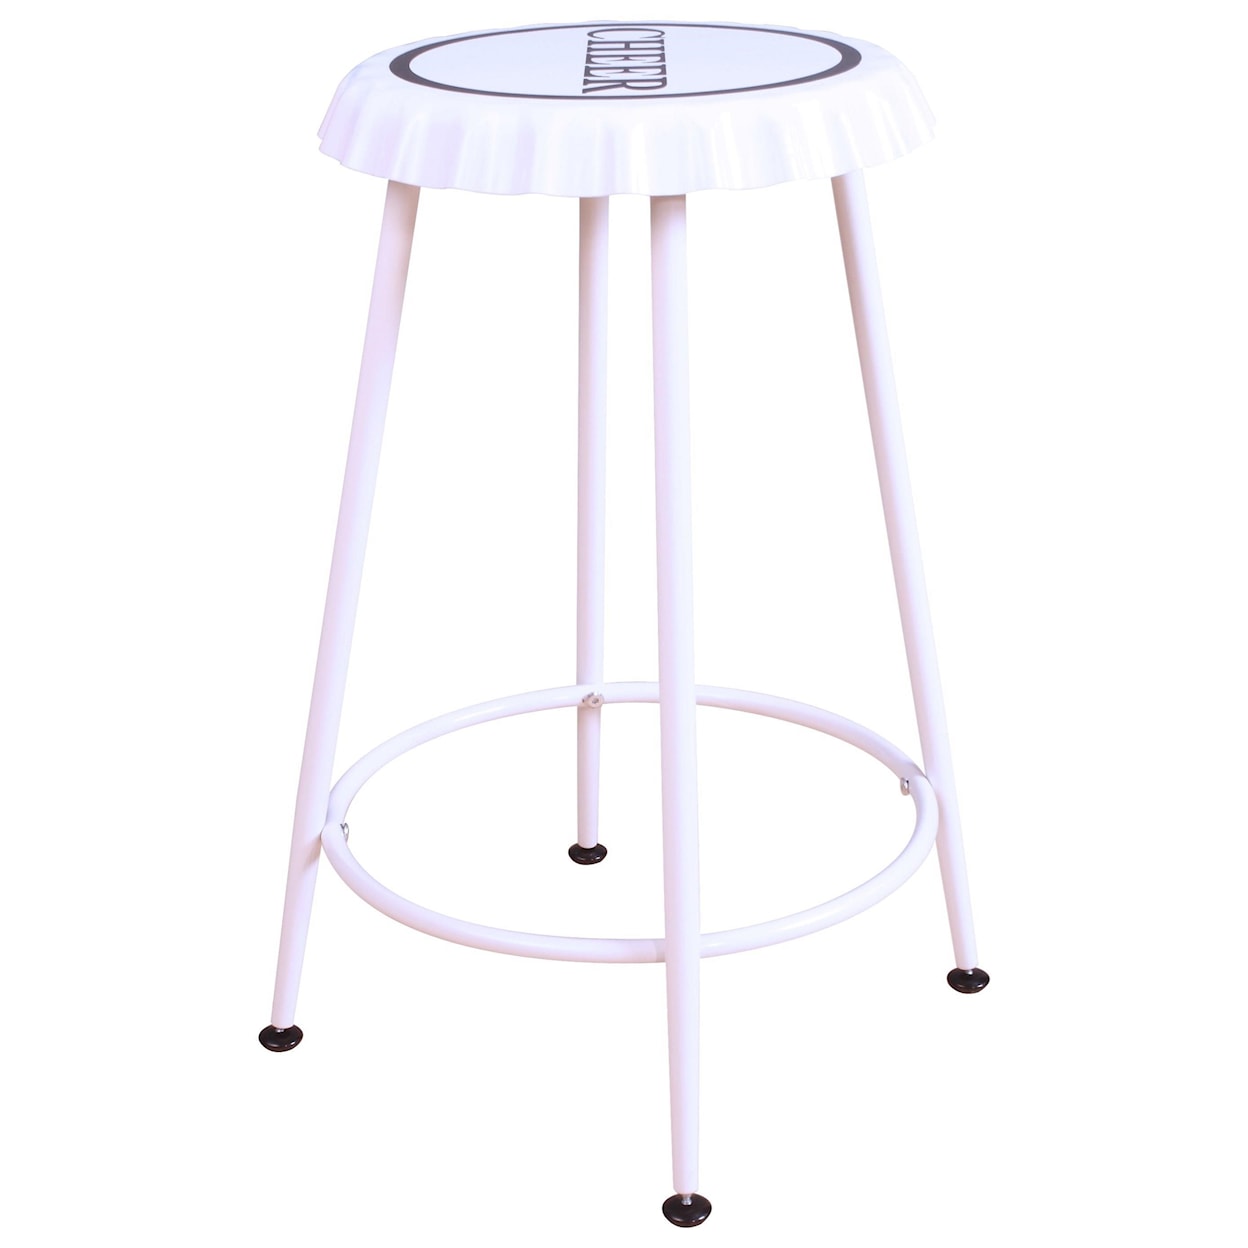 Acme Furniture Mant Counter Height Stool 